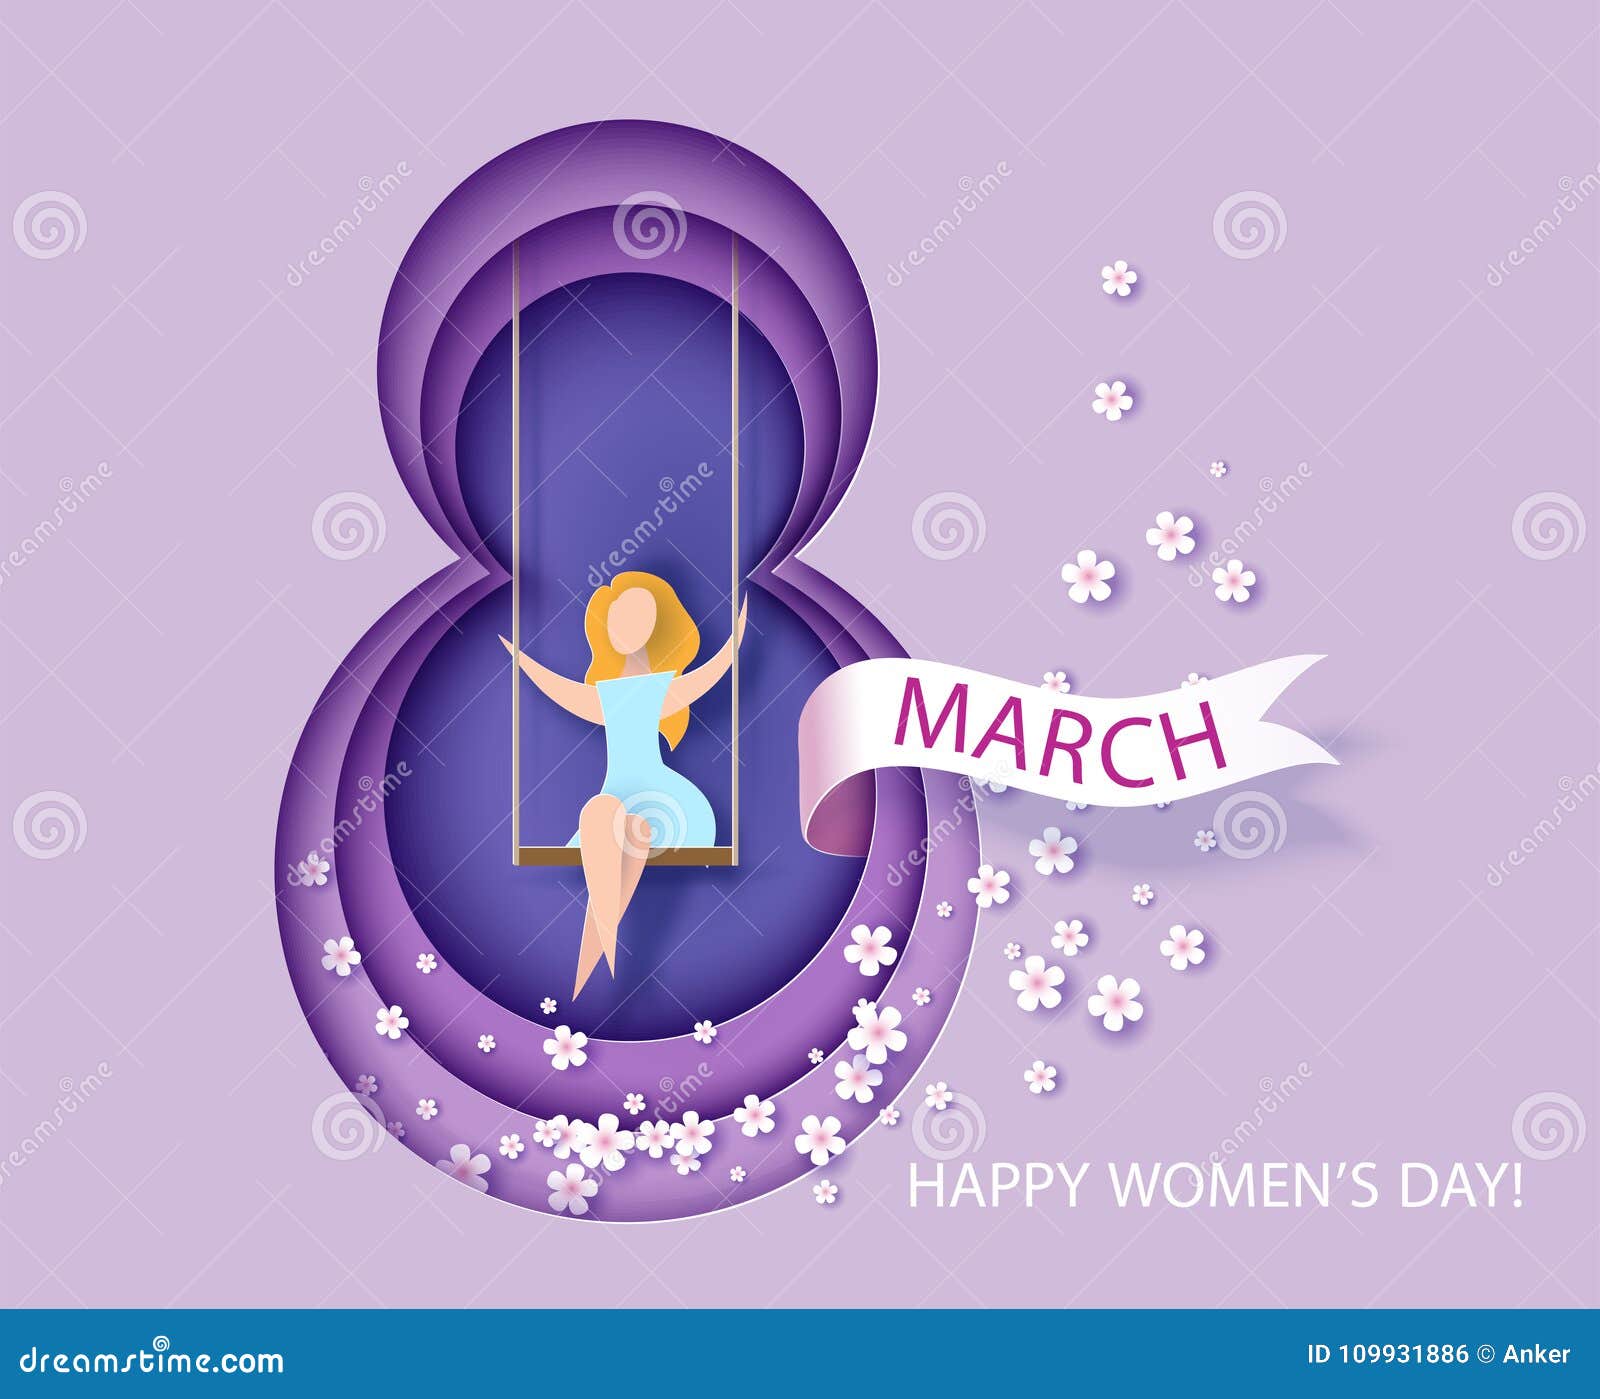 card for 8 march womens day. woman on teeterboard